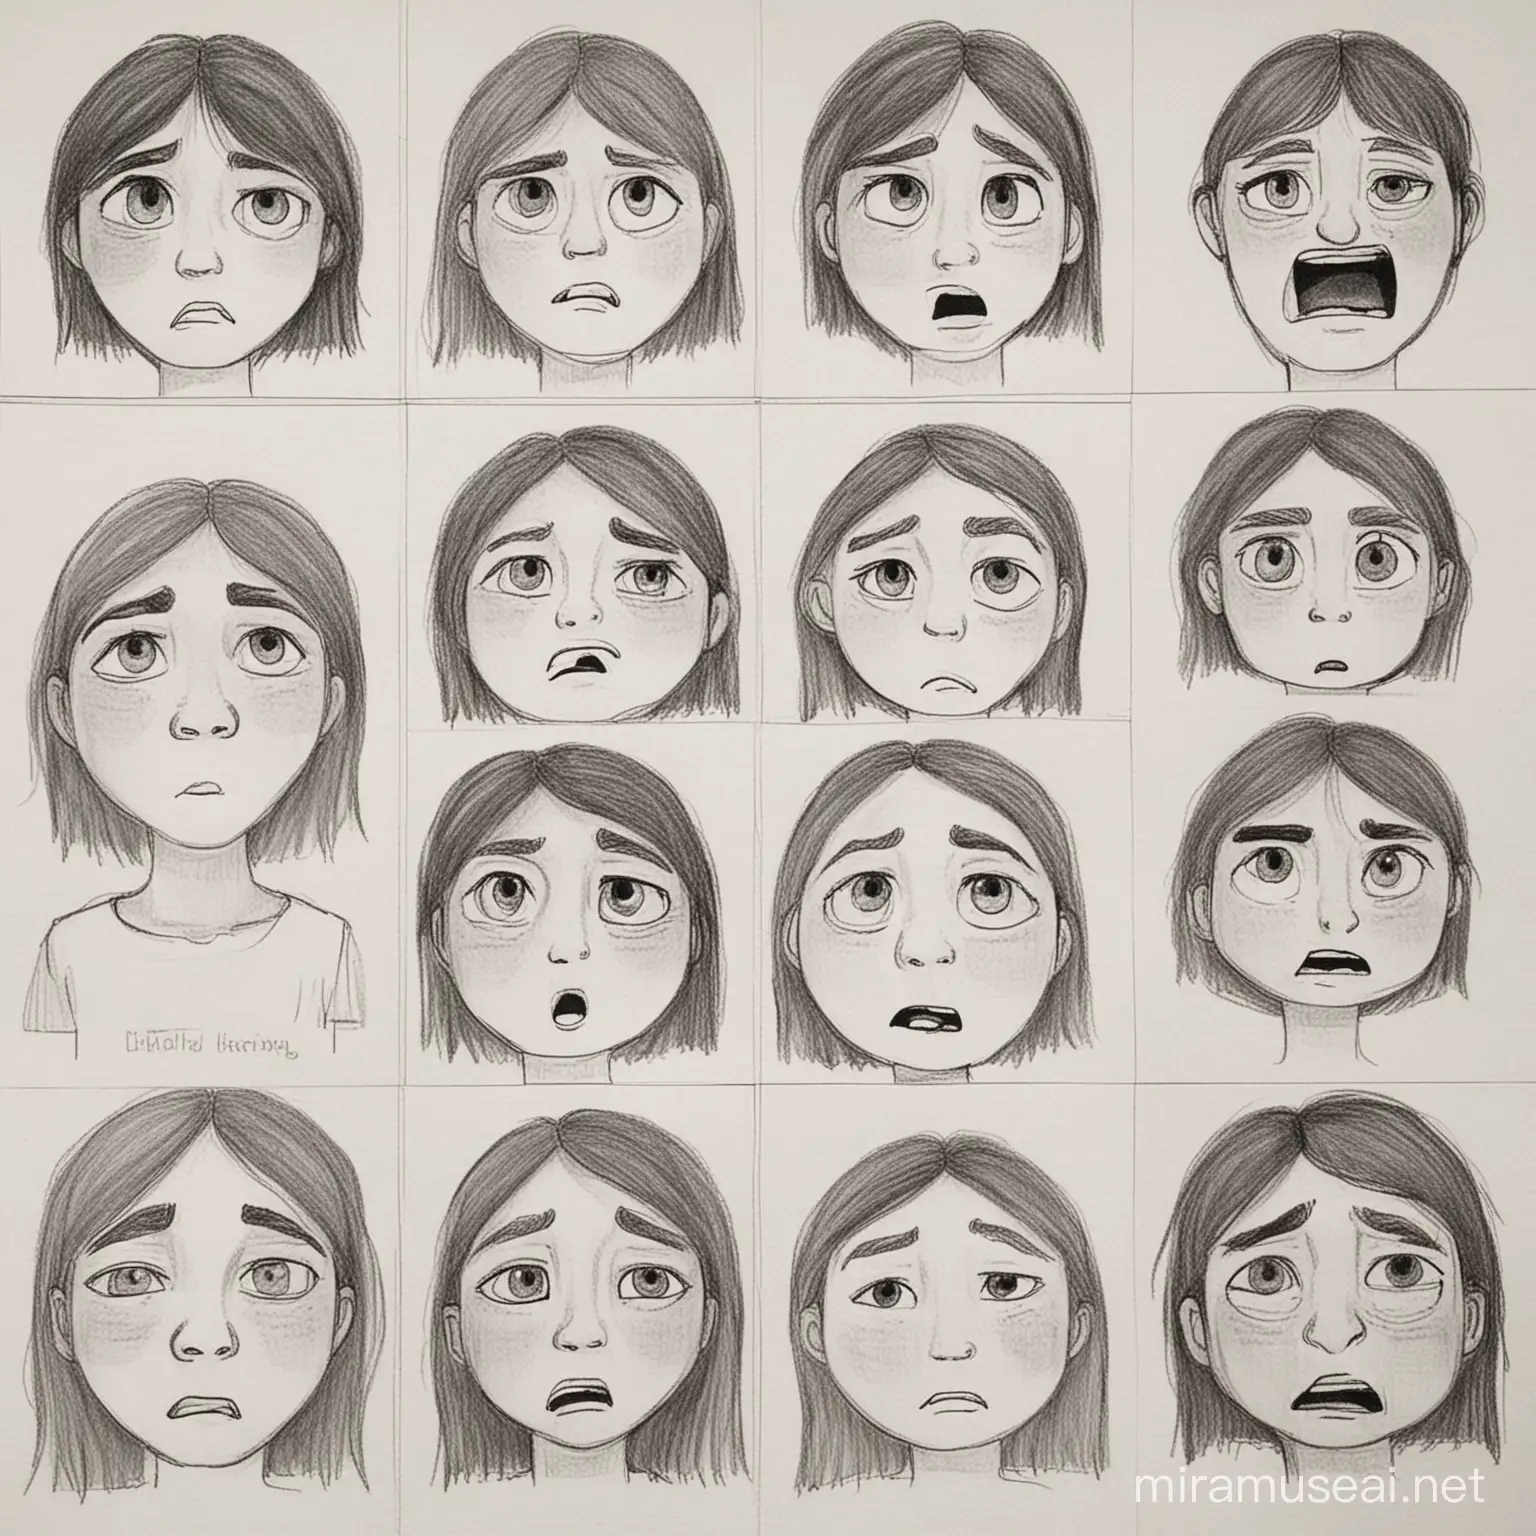 Emotional Illustrations Sadness Anger Hope and Resilience Depicted in Artwork